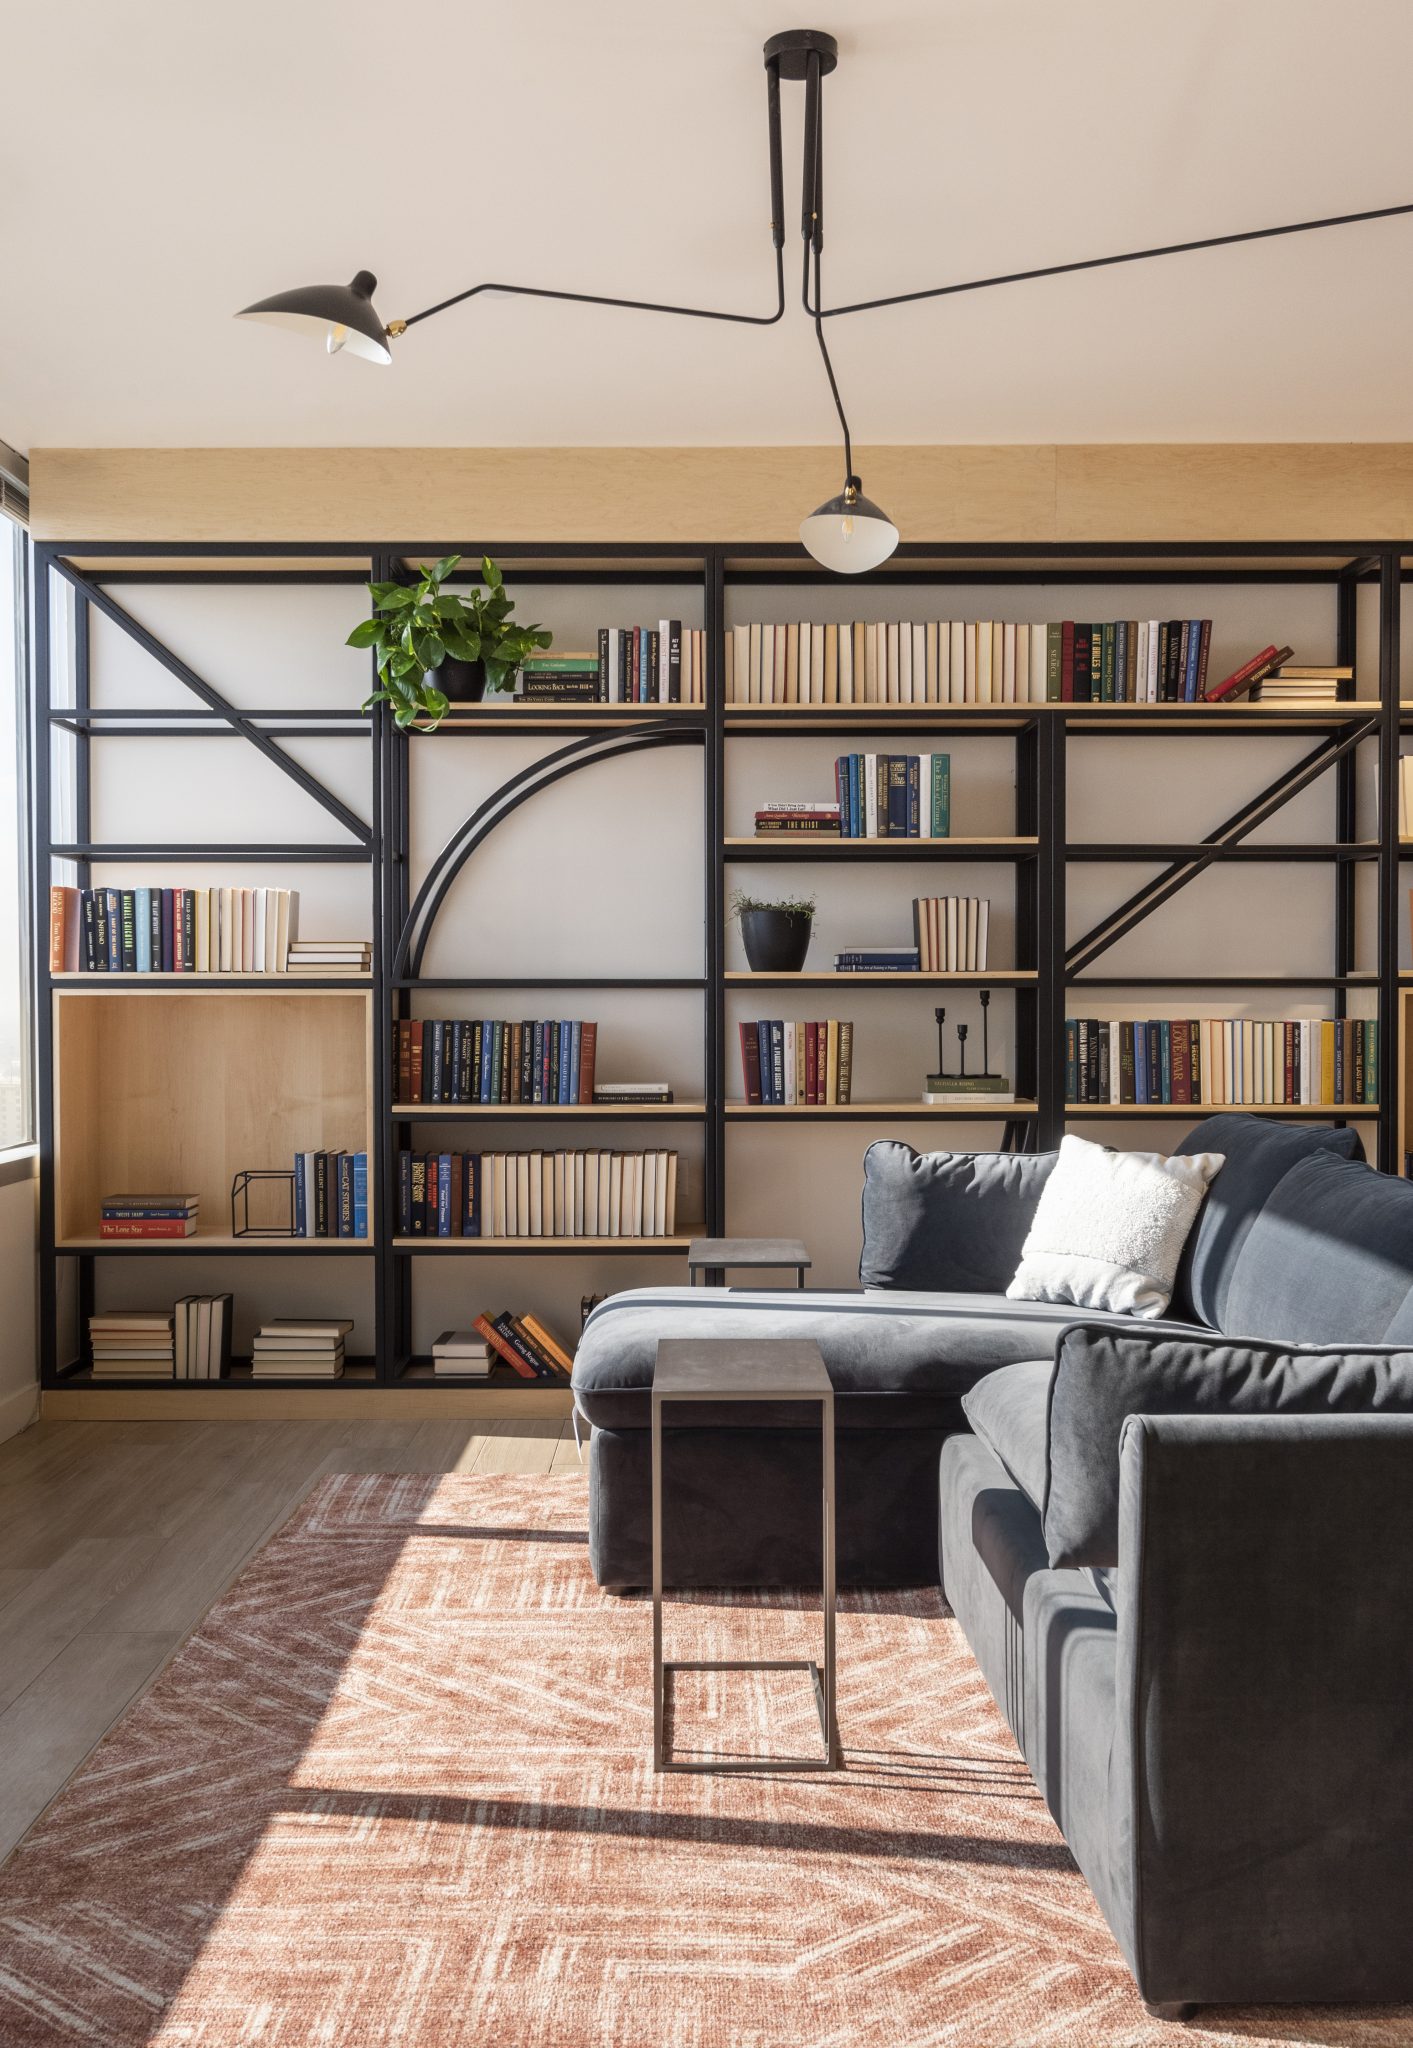 Library nook + lounge